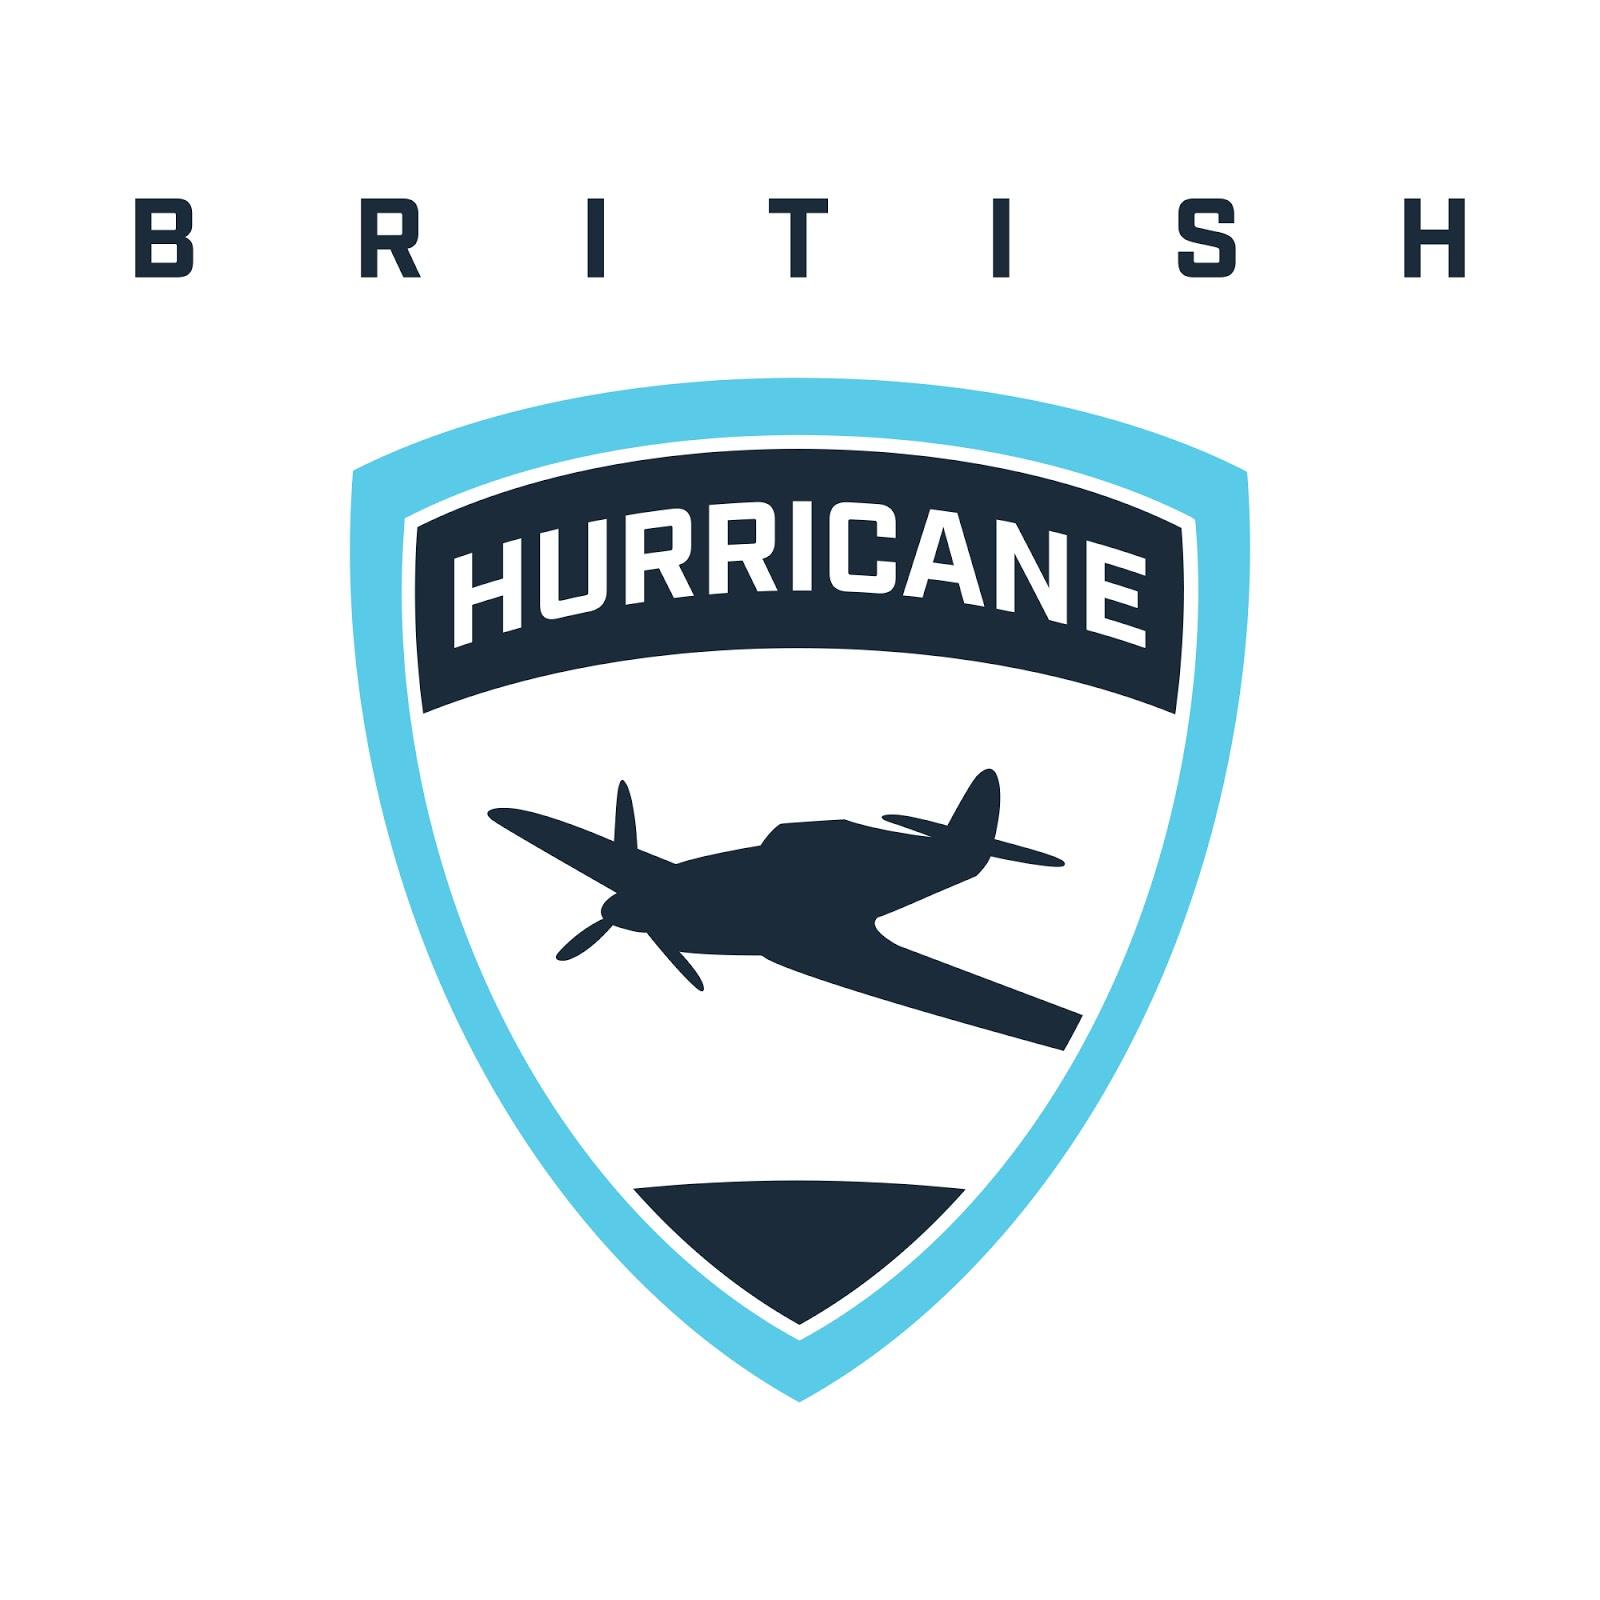 Hurricane Logo - The British Hurricane Unveil Their Roster and Logo - Break The Game